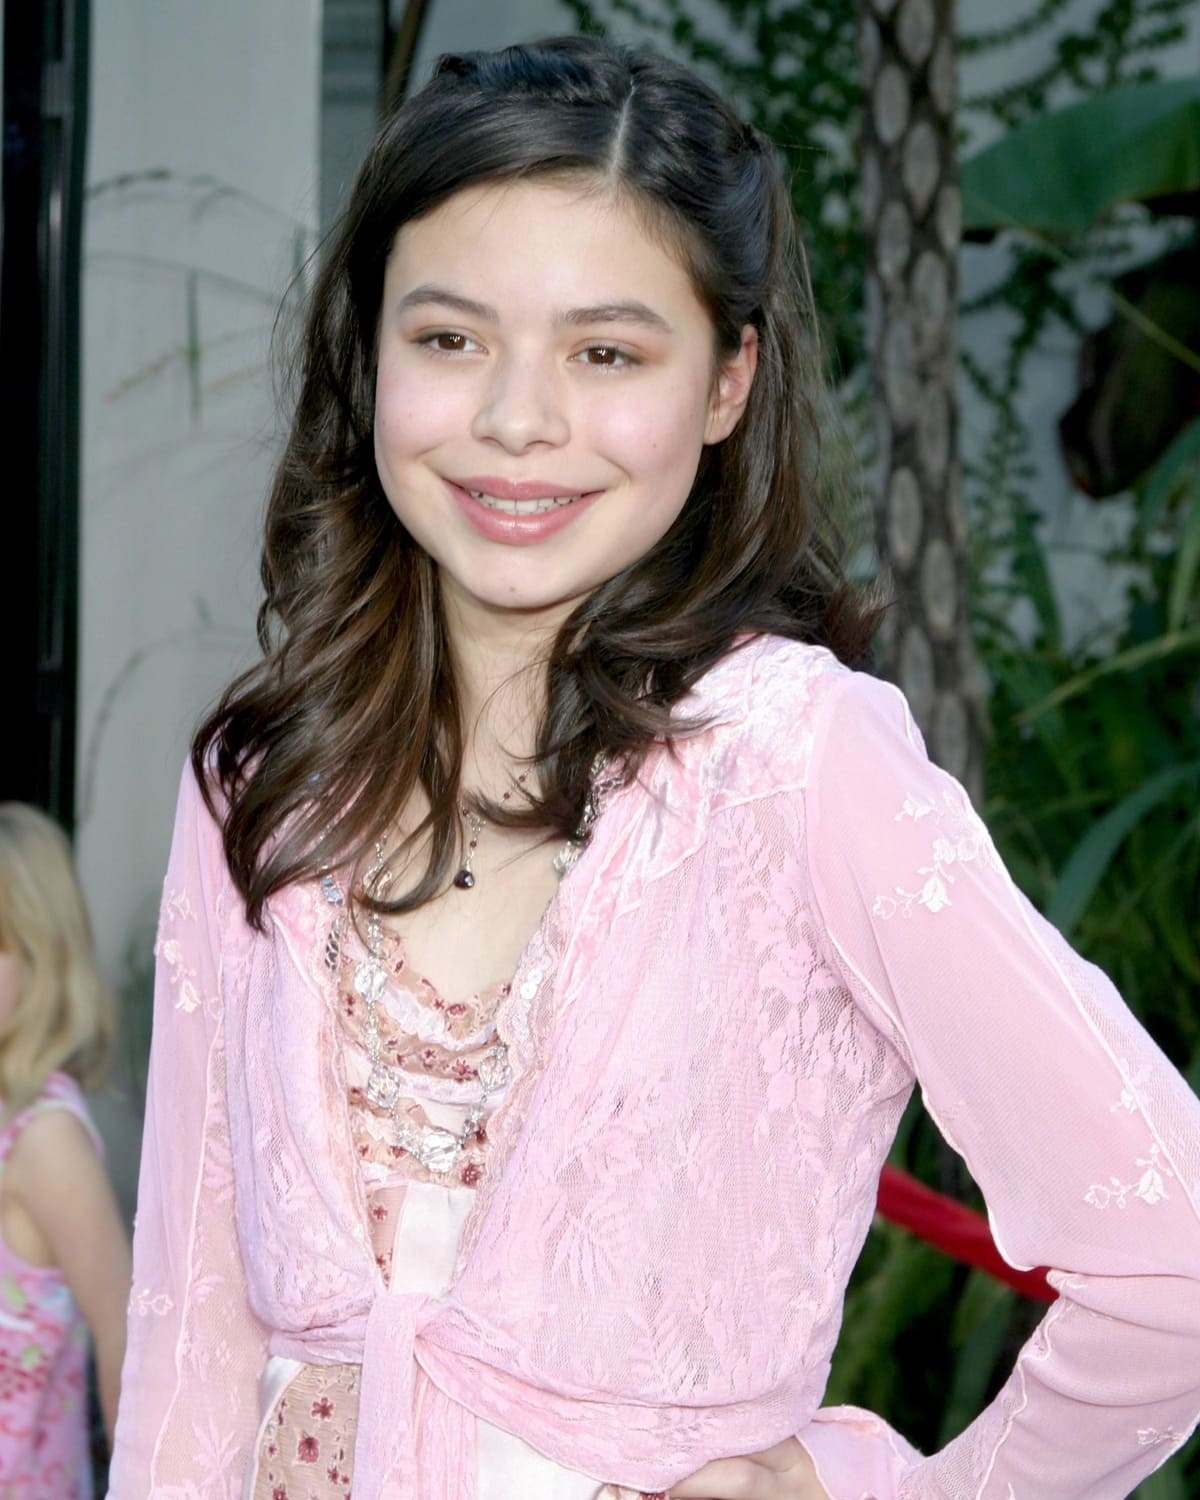 Miranda Taylor Cosgrove was listed in the Guinness World Records as the highest-paid child actress of 2012